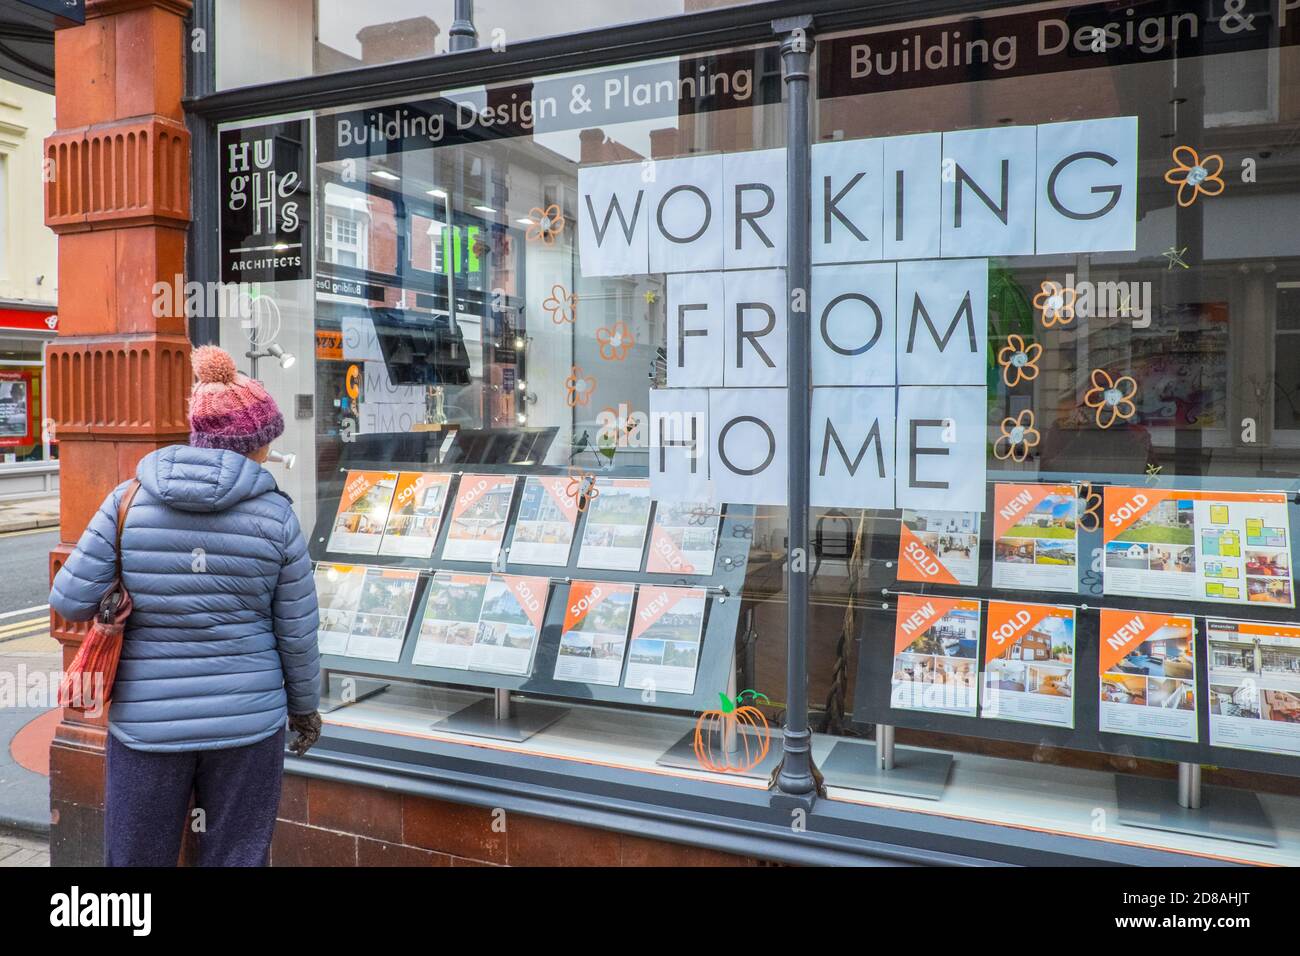 Working from Home,due,to,Covid 19,restrictions,during,17 day, firebreak,circuit break,sign,signage,in,shop window,of,Alexanders,High Street,real estate,estate agent,estate agency,shop,business,in,Aberystwyth,Aberystwyth Town,town,town centre, town centre,Cardigan Bay,coast,coastal,student,student town,Wales,Mid Wales,West Wales,Welsh,Europe, Firebreak,circuit break,lockdown,imposed,by,devolved,WAG,Welsh Assembly Government,Welsh Government,Wales Covid Rule apply,Wales Covid rules,Covid in Wales,in,Coronavirus,mobile,covid,estate agent covid, Stock Photo